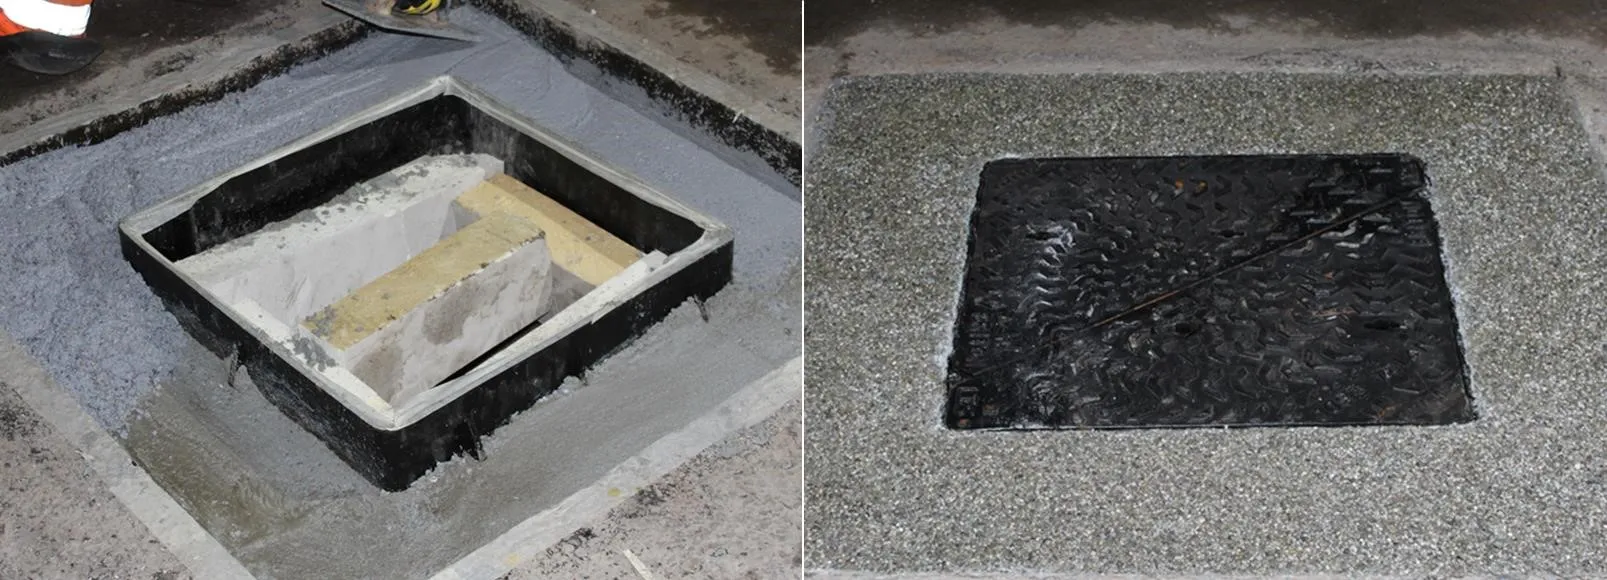 ProductsRapid Curing Flowable Concrete Repair, Ironwork Reinstatement and Re-profiling Mortar